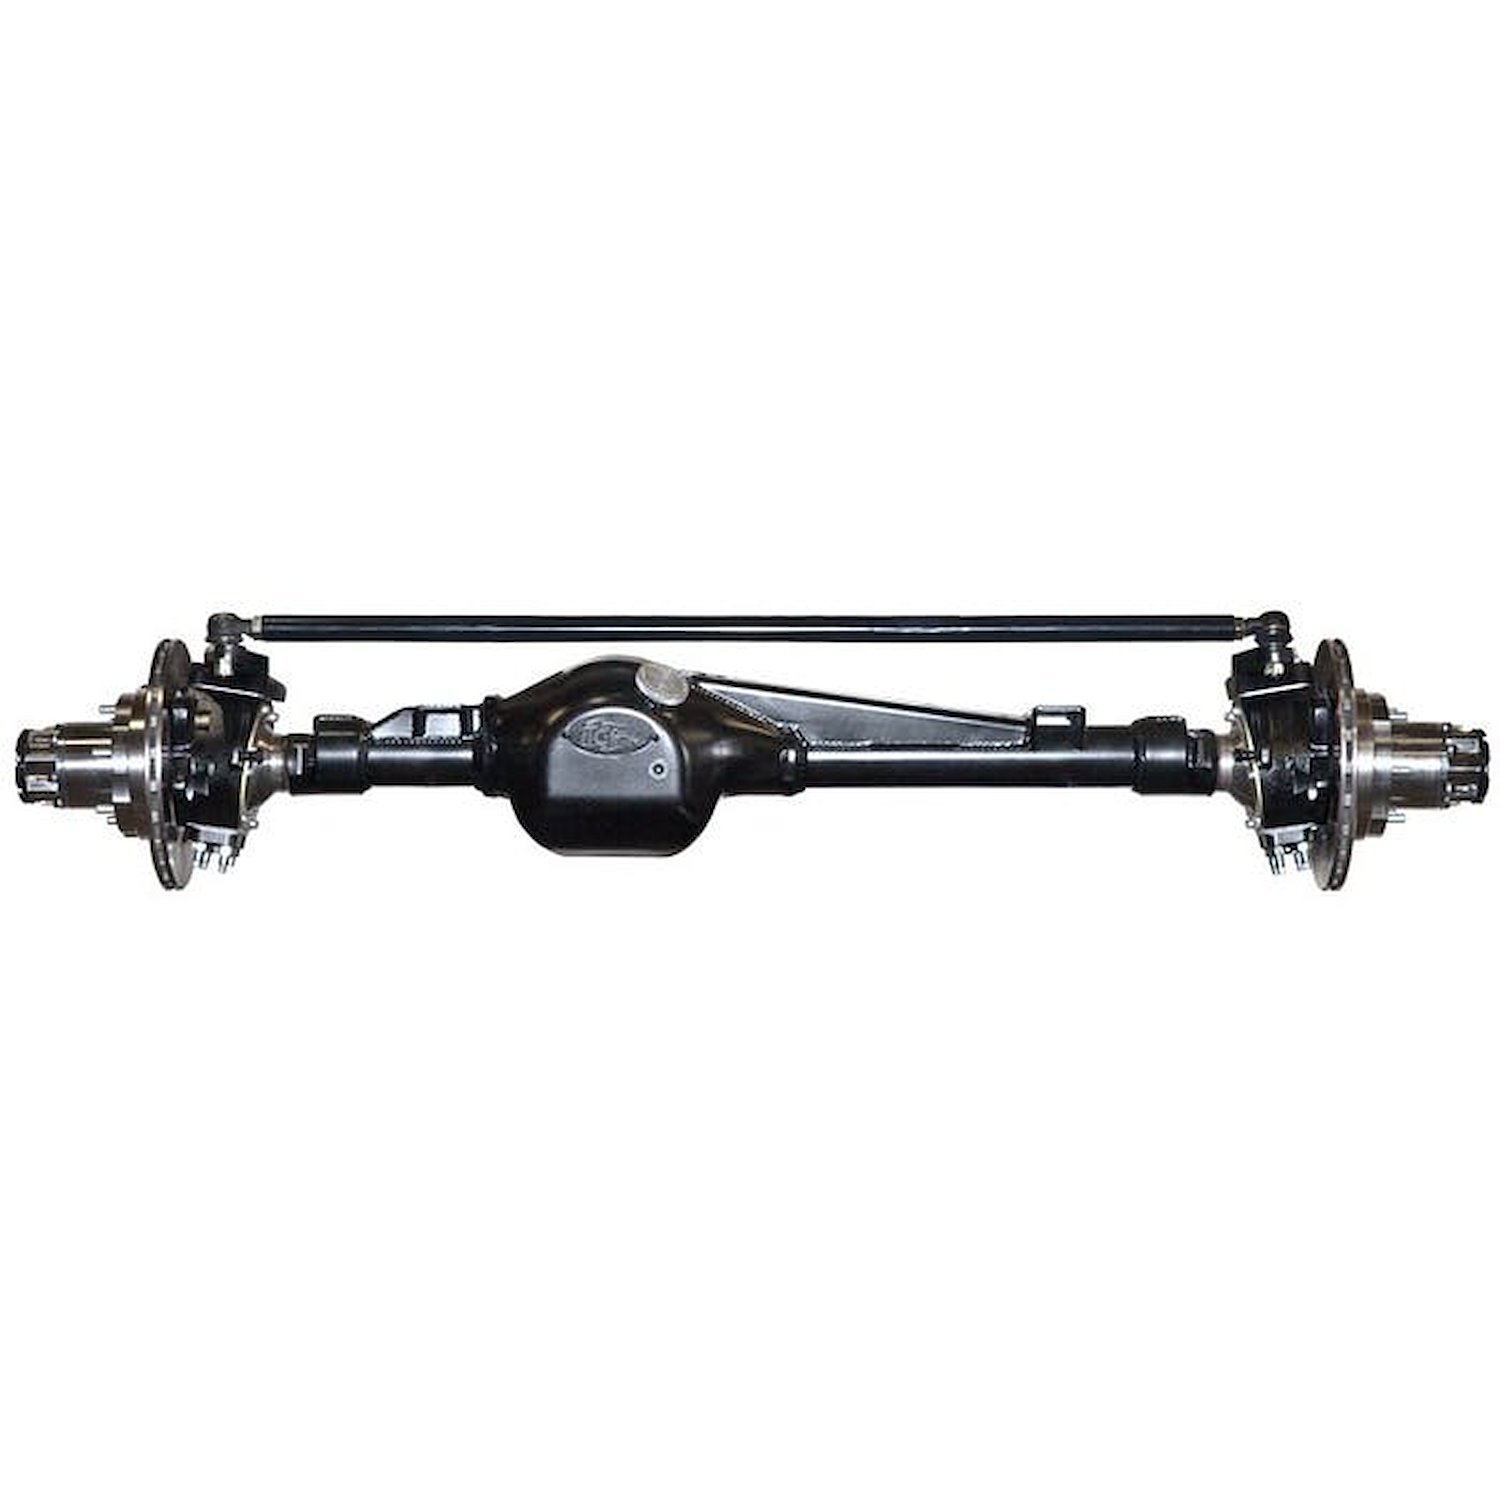 301610-1-KIT Rock Assault Fully-Built Front Axles, +3 Width, RHD, High-Pinion, 4.88, Grizzly, Creeper Flanges, Toyota